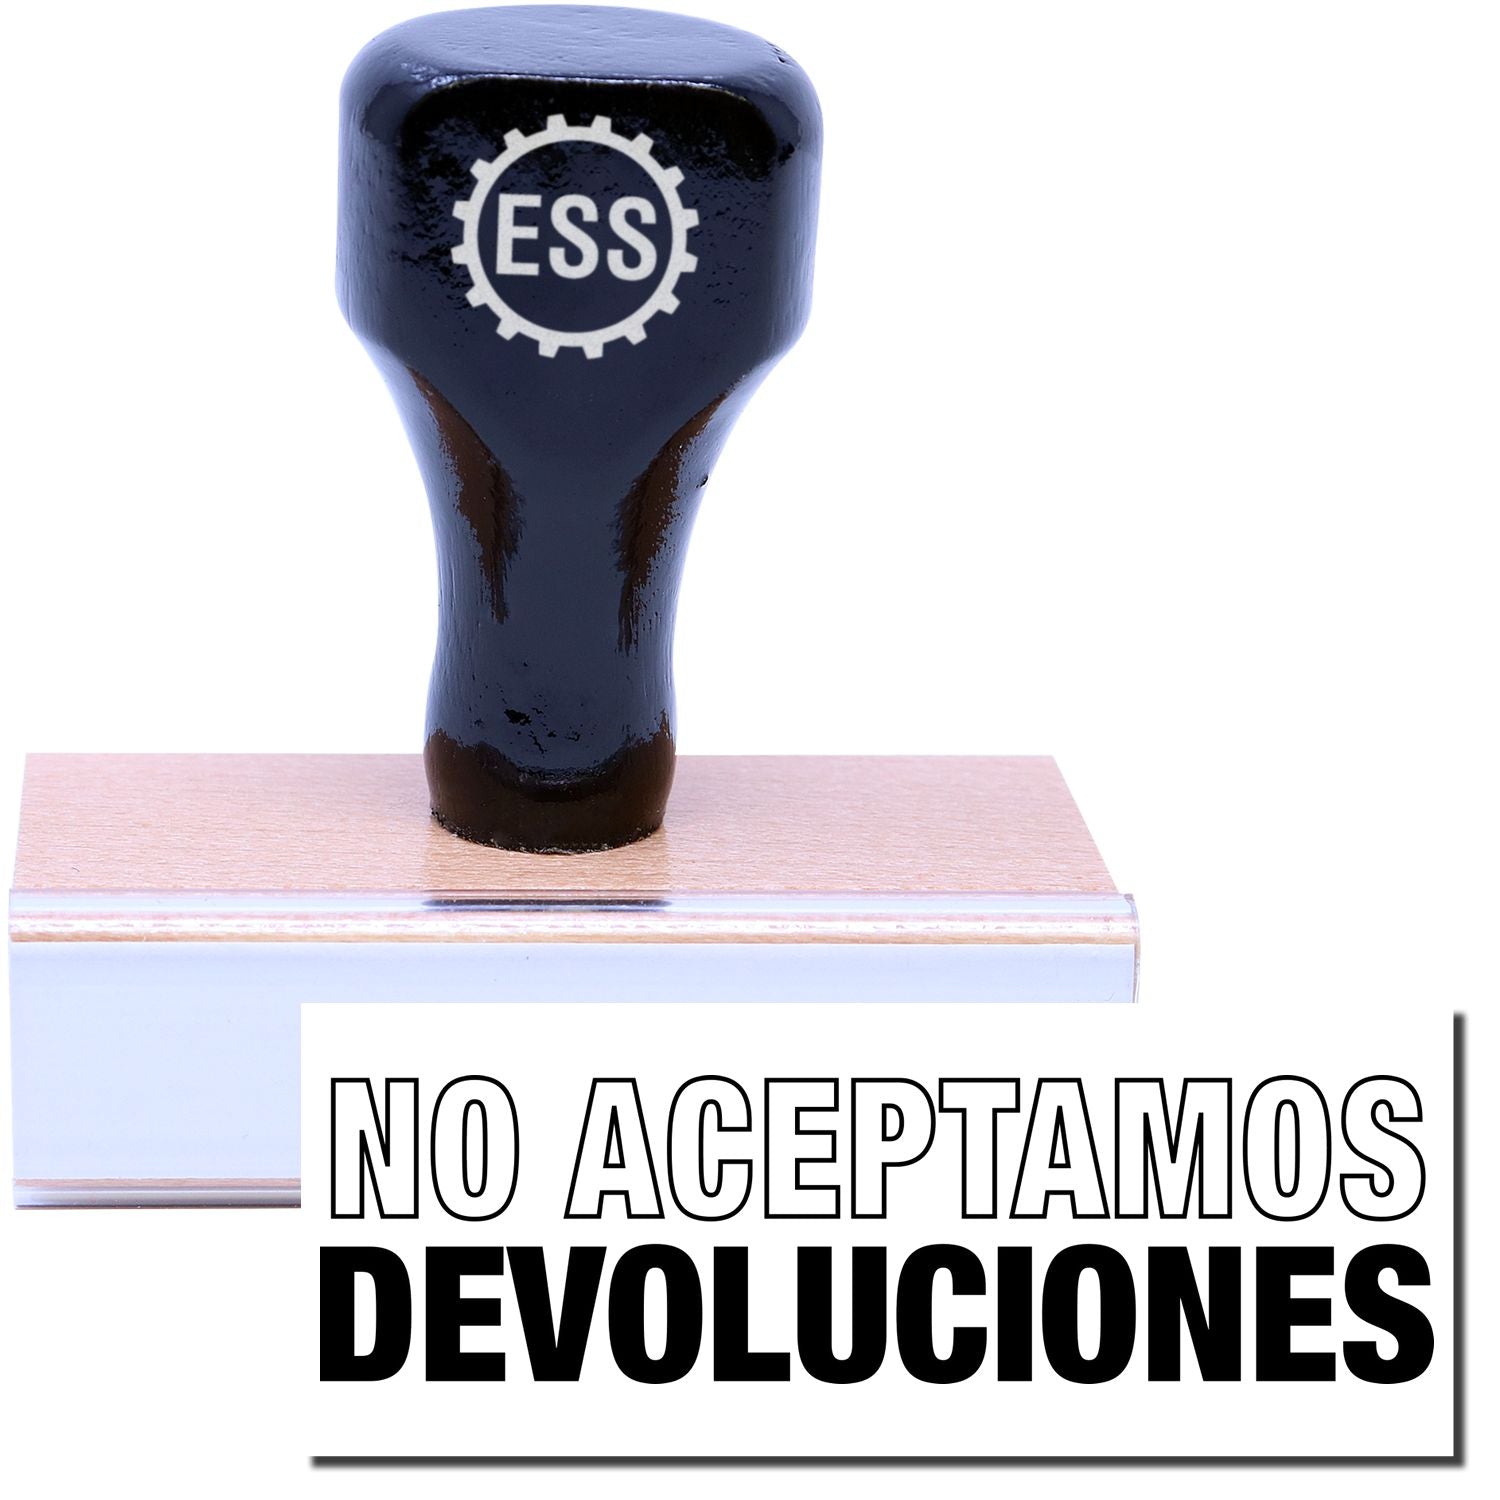 A stock office rubber stamp with a stamped image showing how the text "NO ACEPTAMOS DEVOLUCIONES" is displayed after stamping.